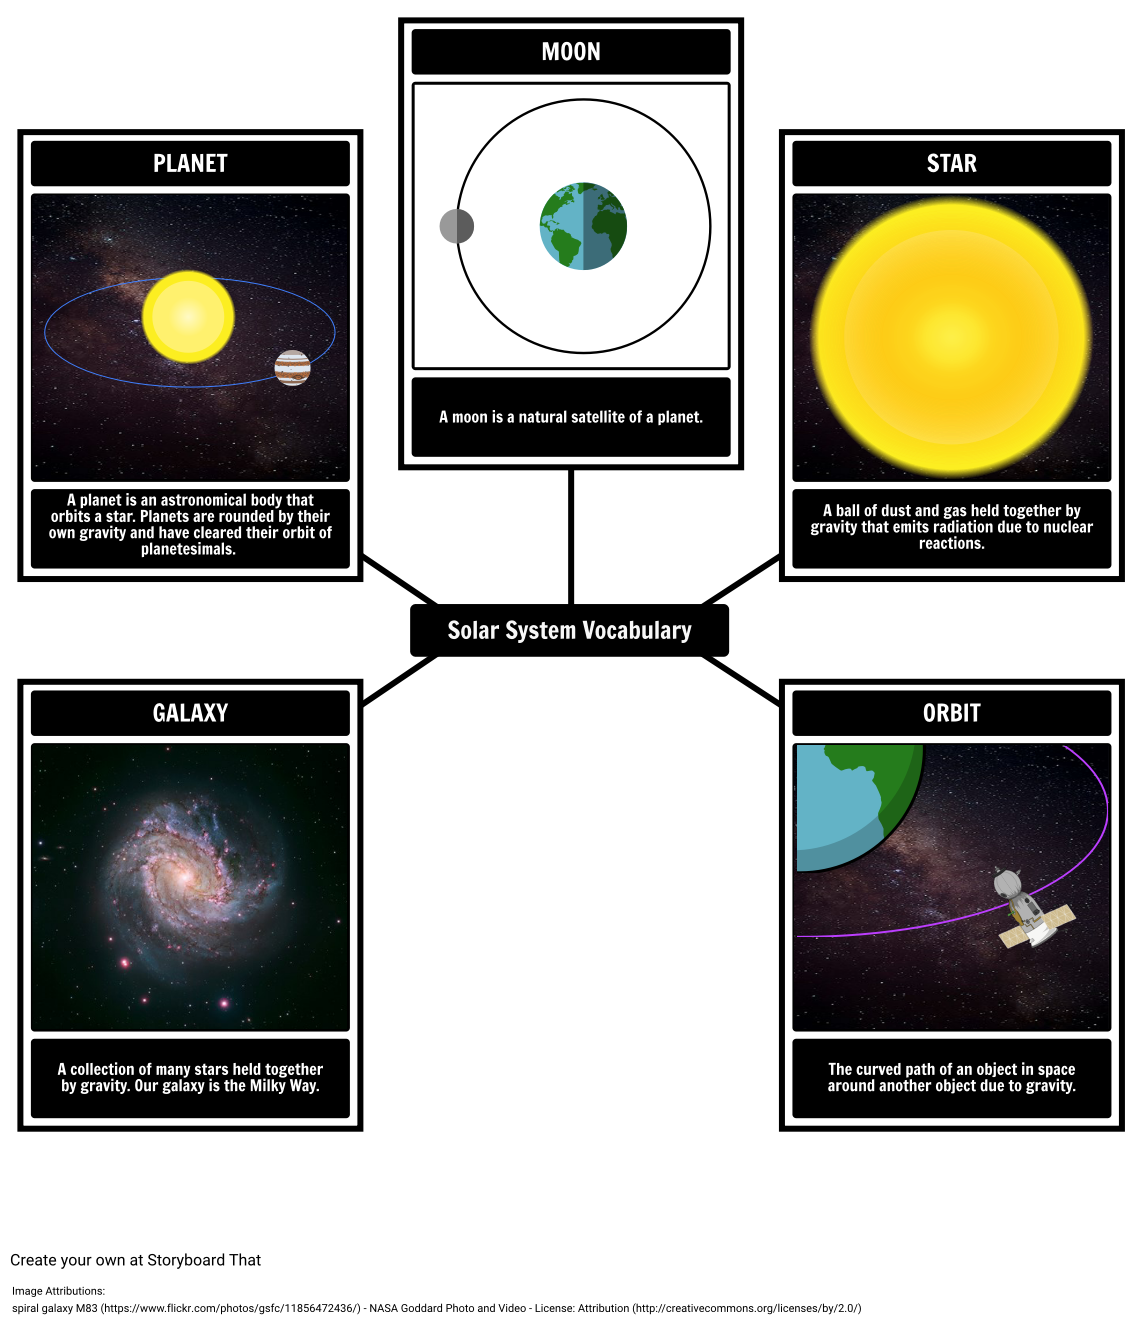 Solar System Vocabulary and Definitions Spider Map